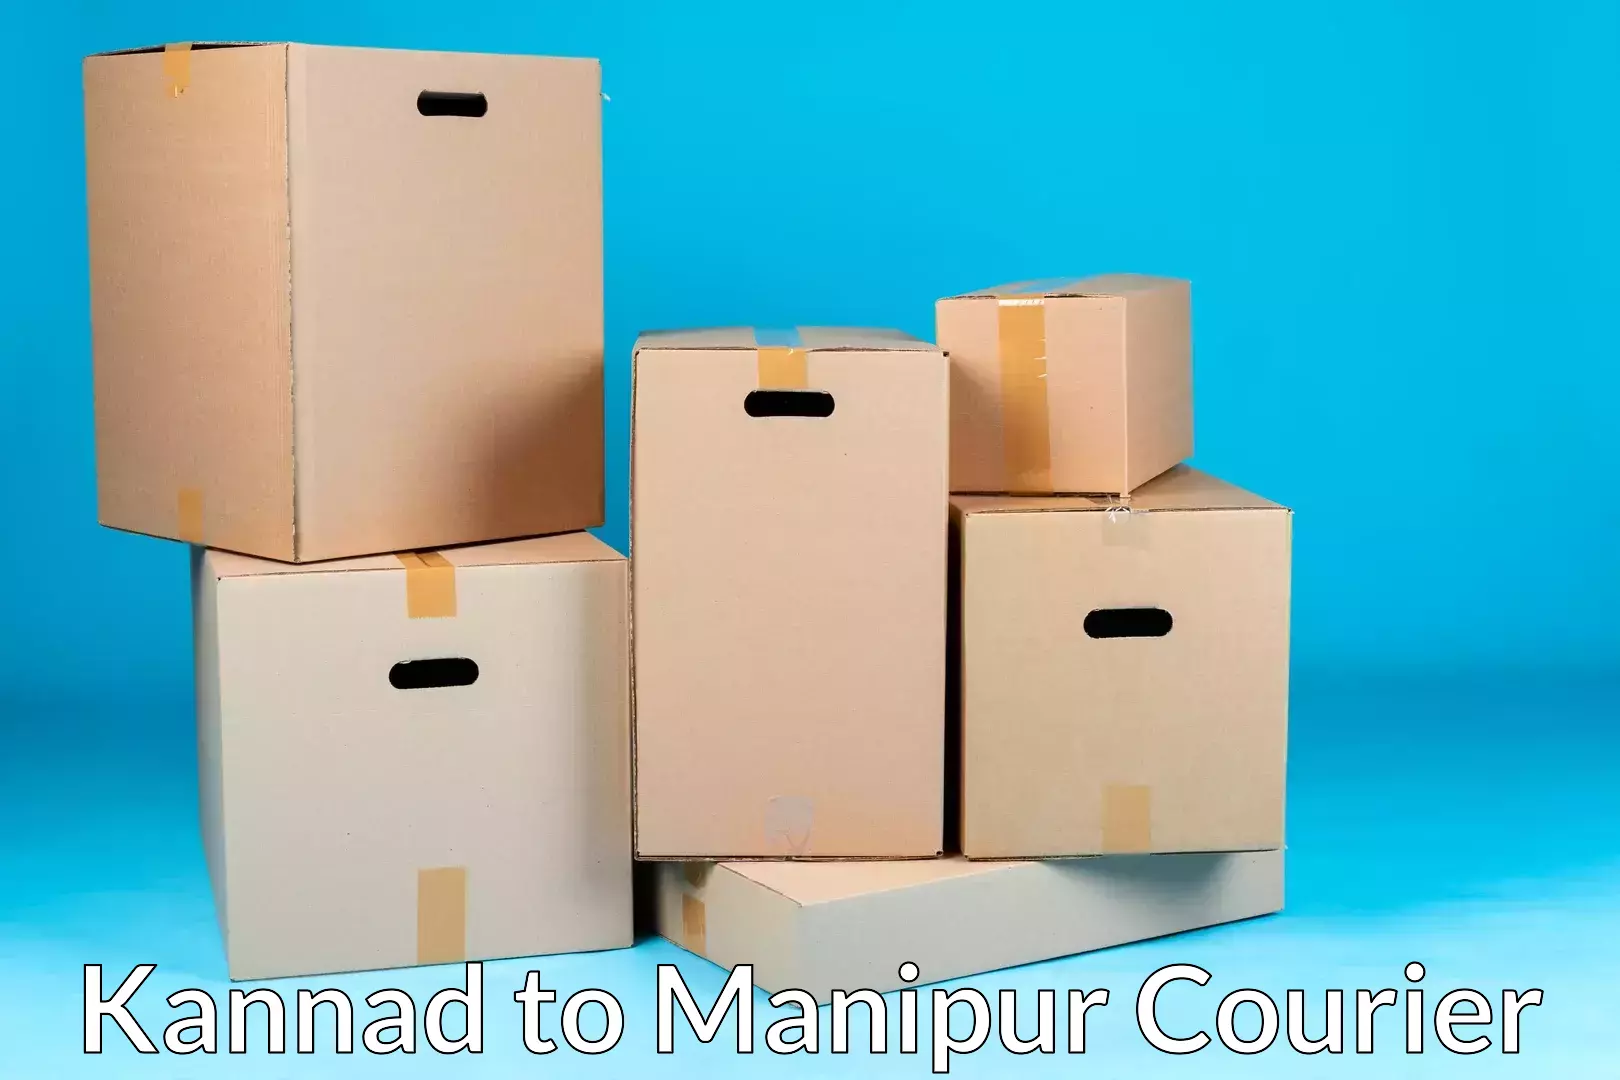 Comprehensive relocation services Kannad to Manipur